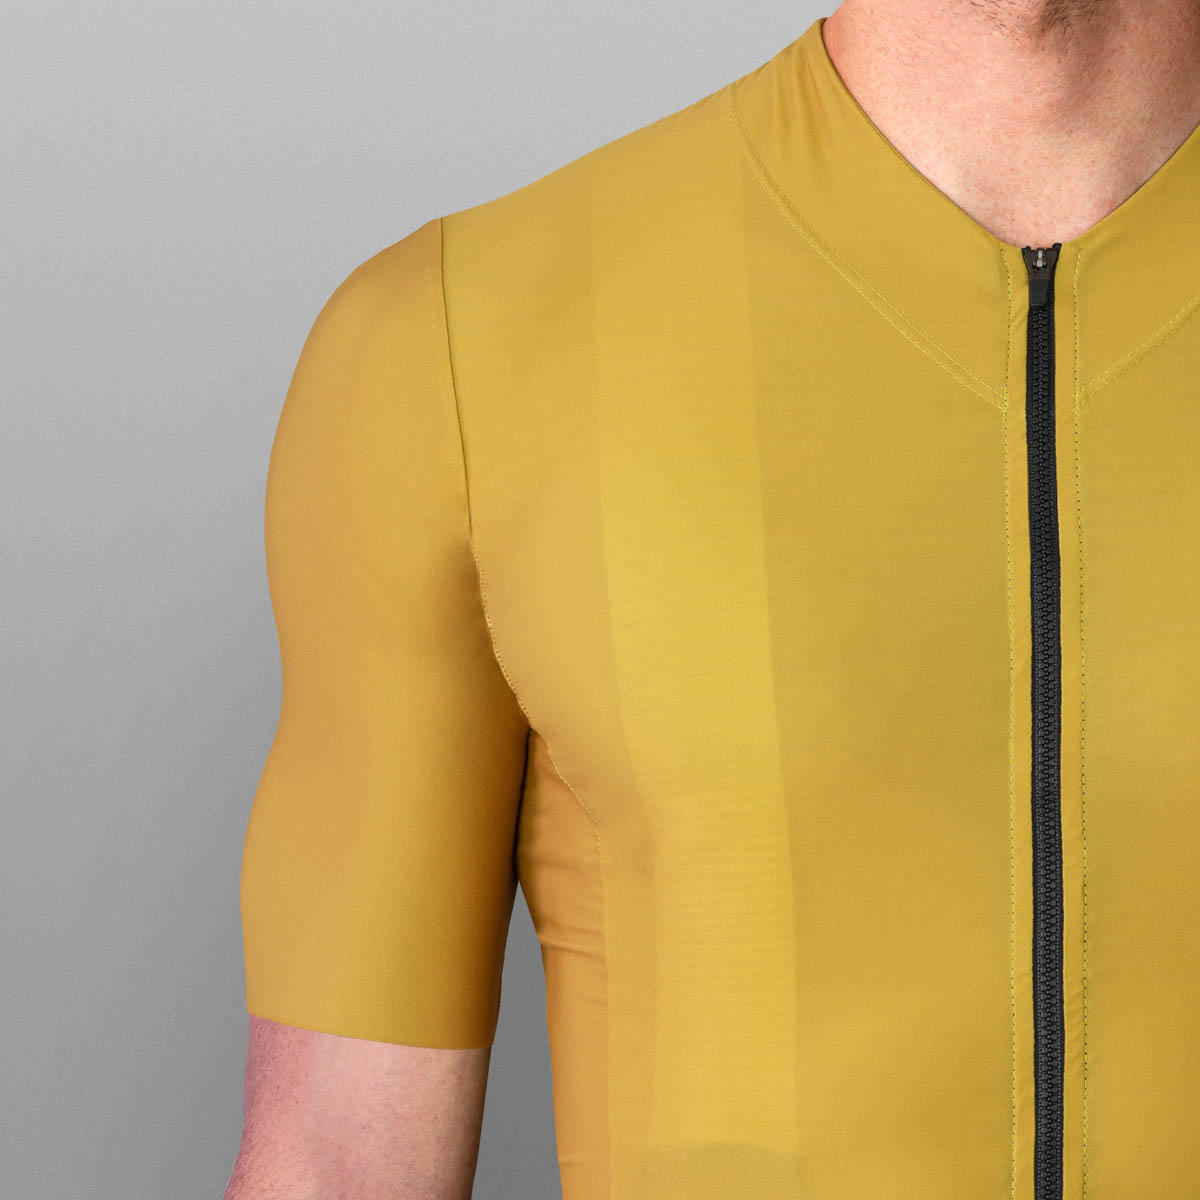 clean gold jersey for road cyclists made by hand in Europe (Poland)